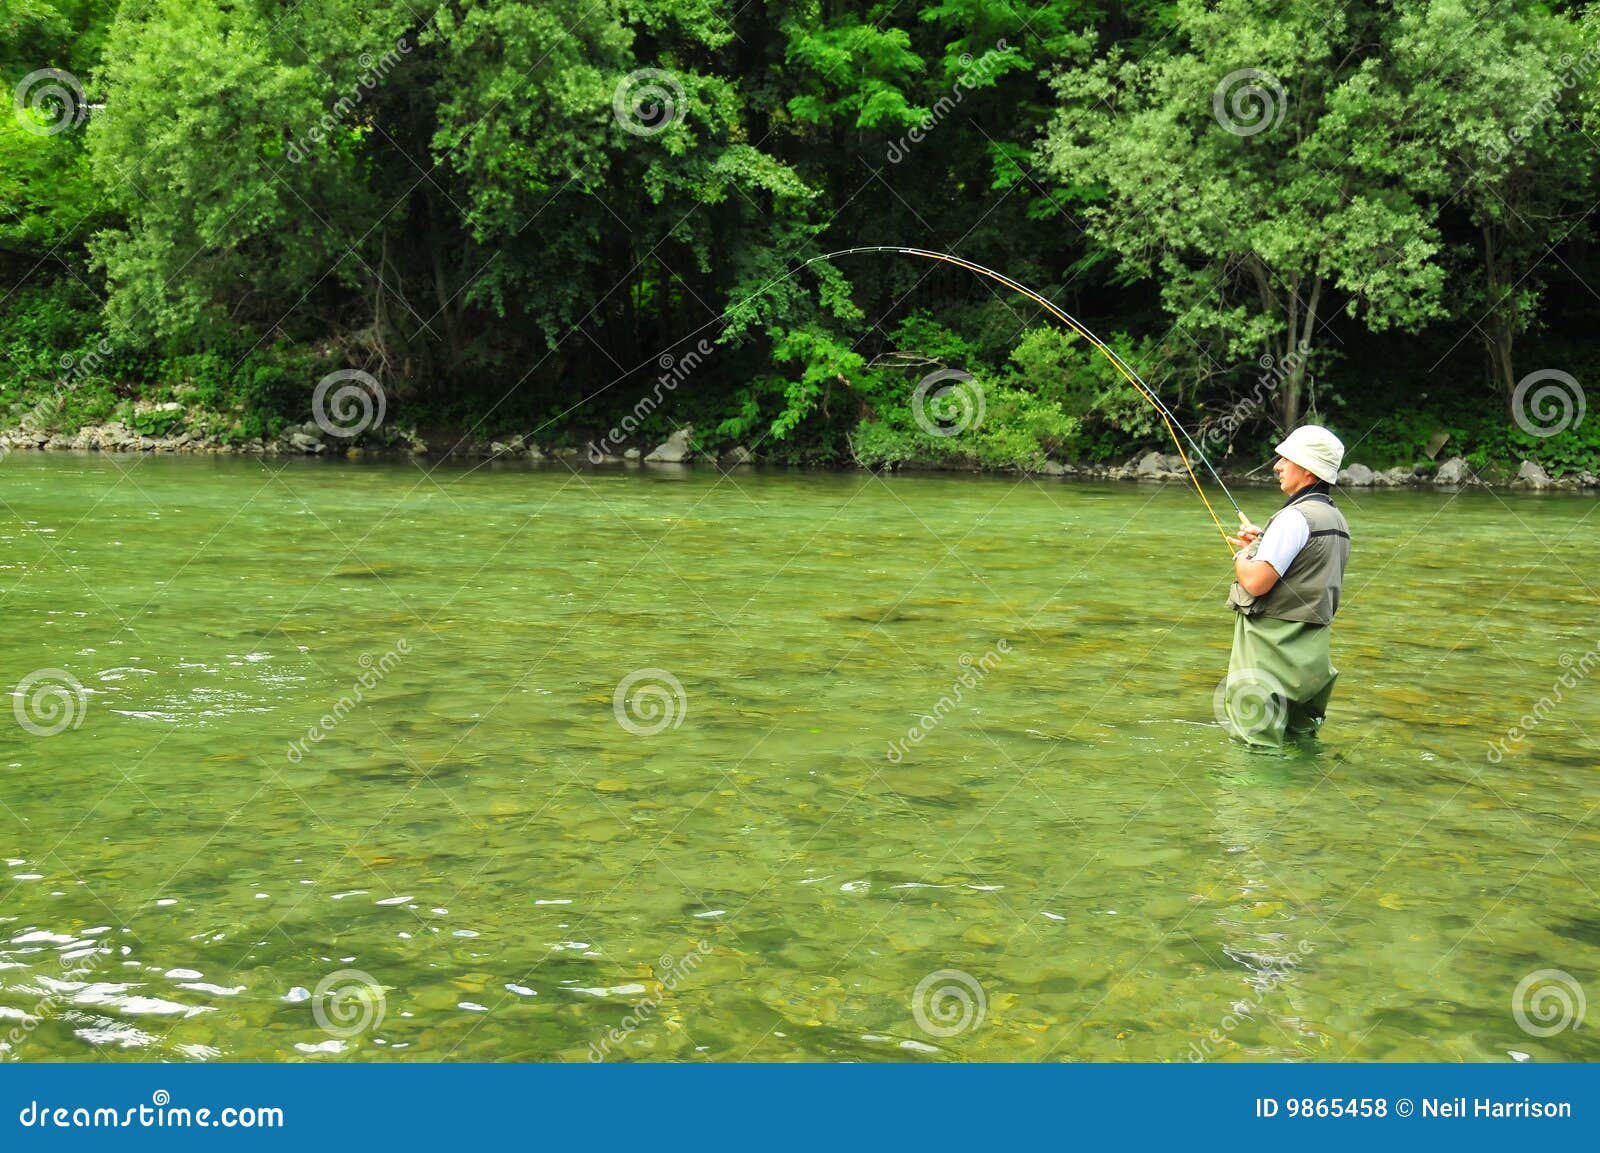 257 Fly Reels Stock Photos - Free & Royalty-Free Stock Photos from